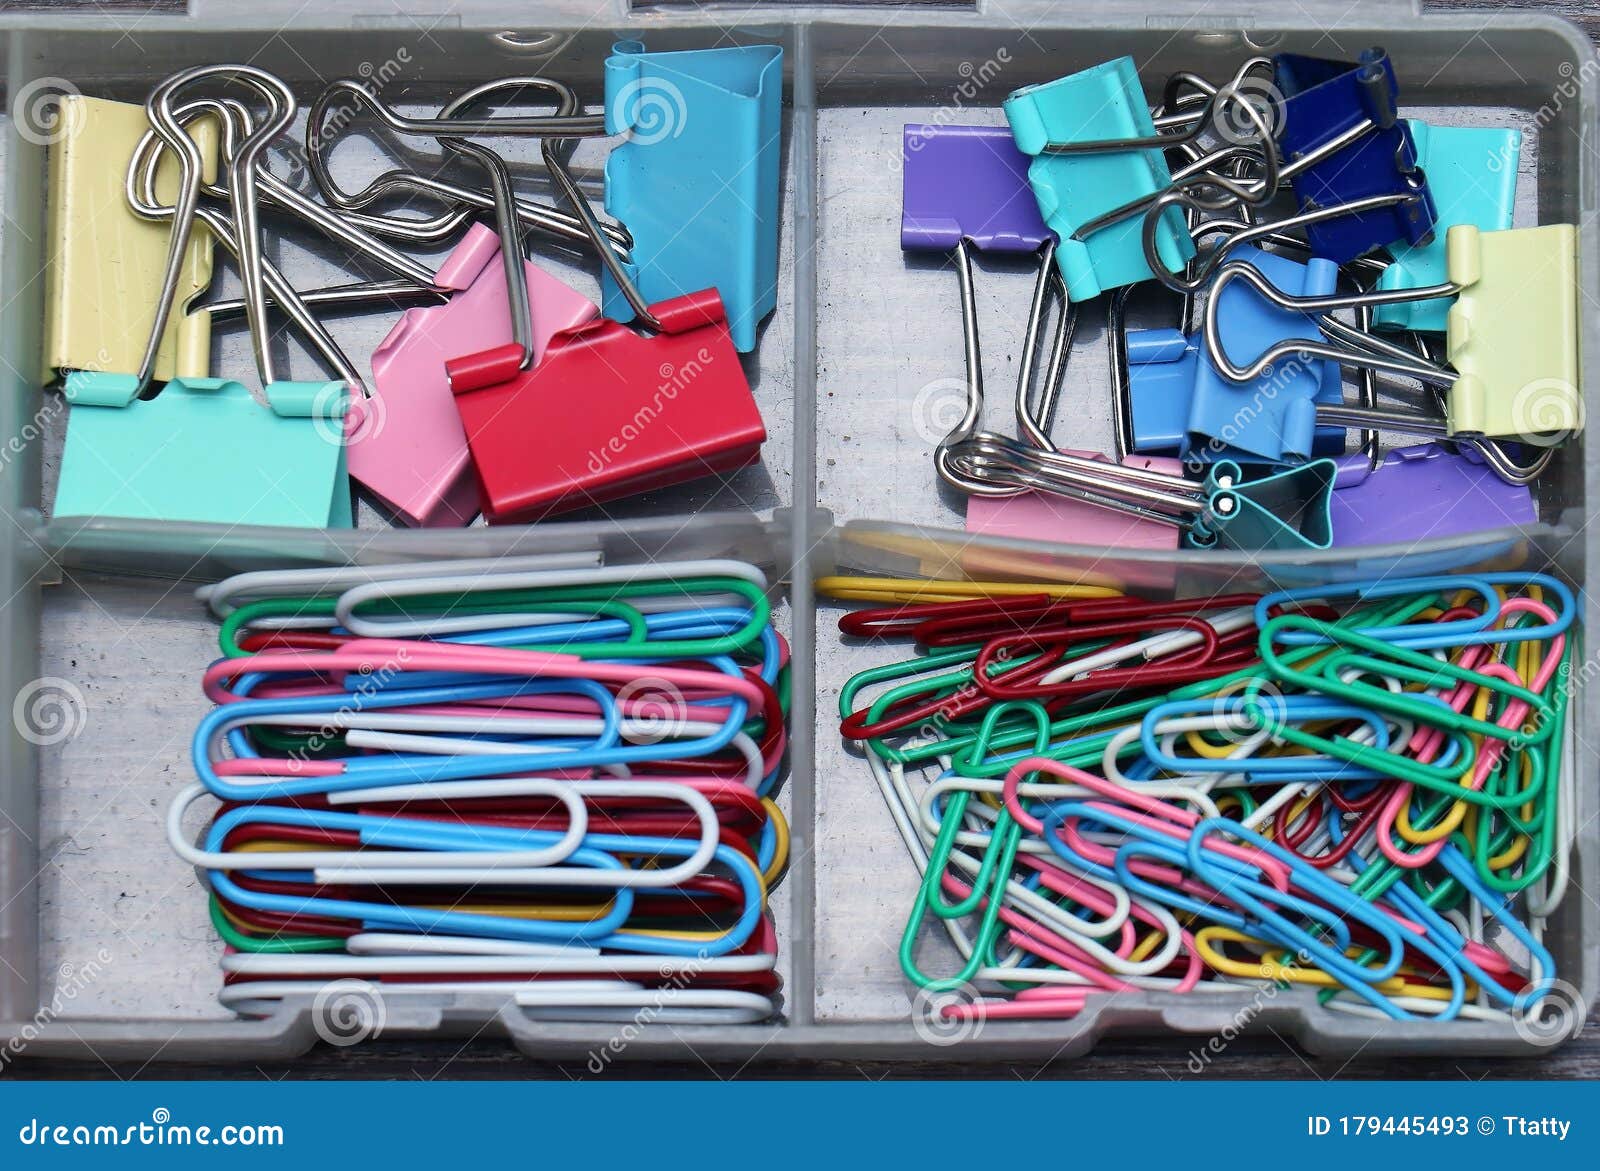 Binder Clips Assorted Metal Binder Clips Clips for Paper Paper Clamps Colored Binder Clips Mr Pen- Binder Clips 100 pcs Paper Clips Clips Paper Binder Clips Assorted Size and Color 